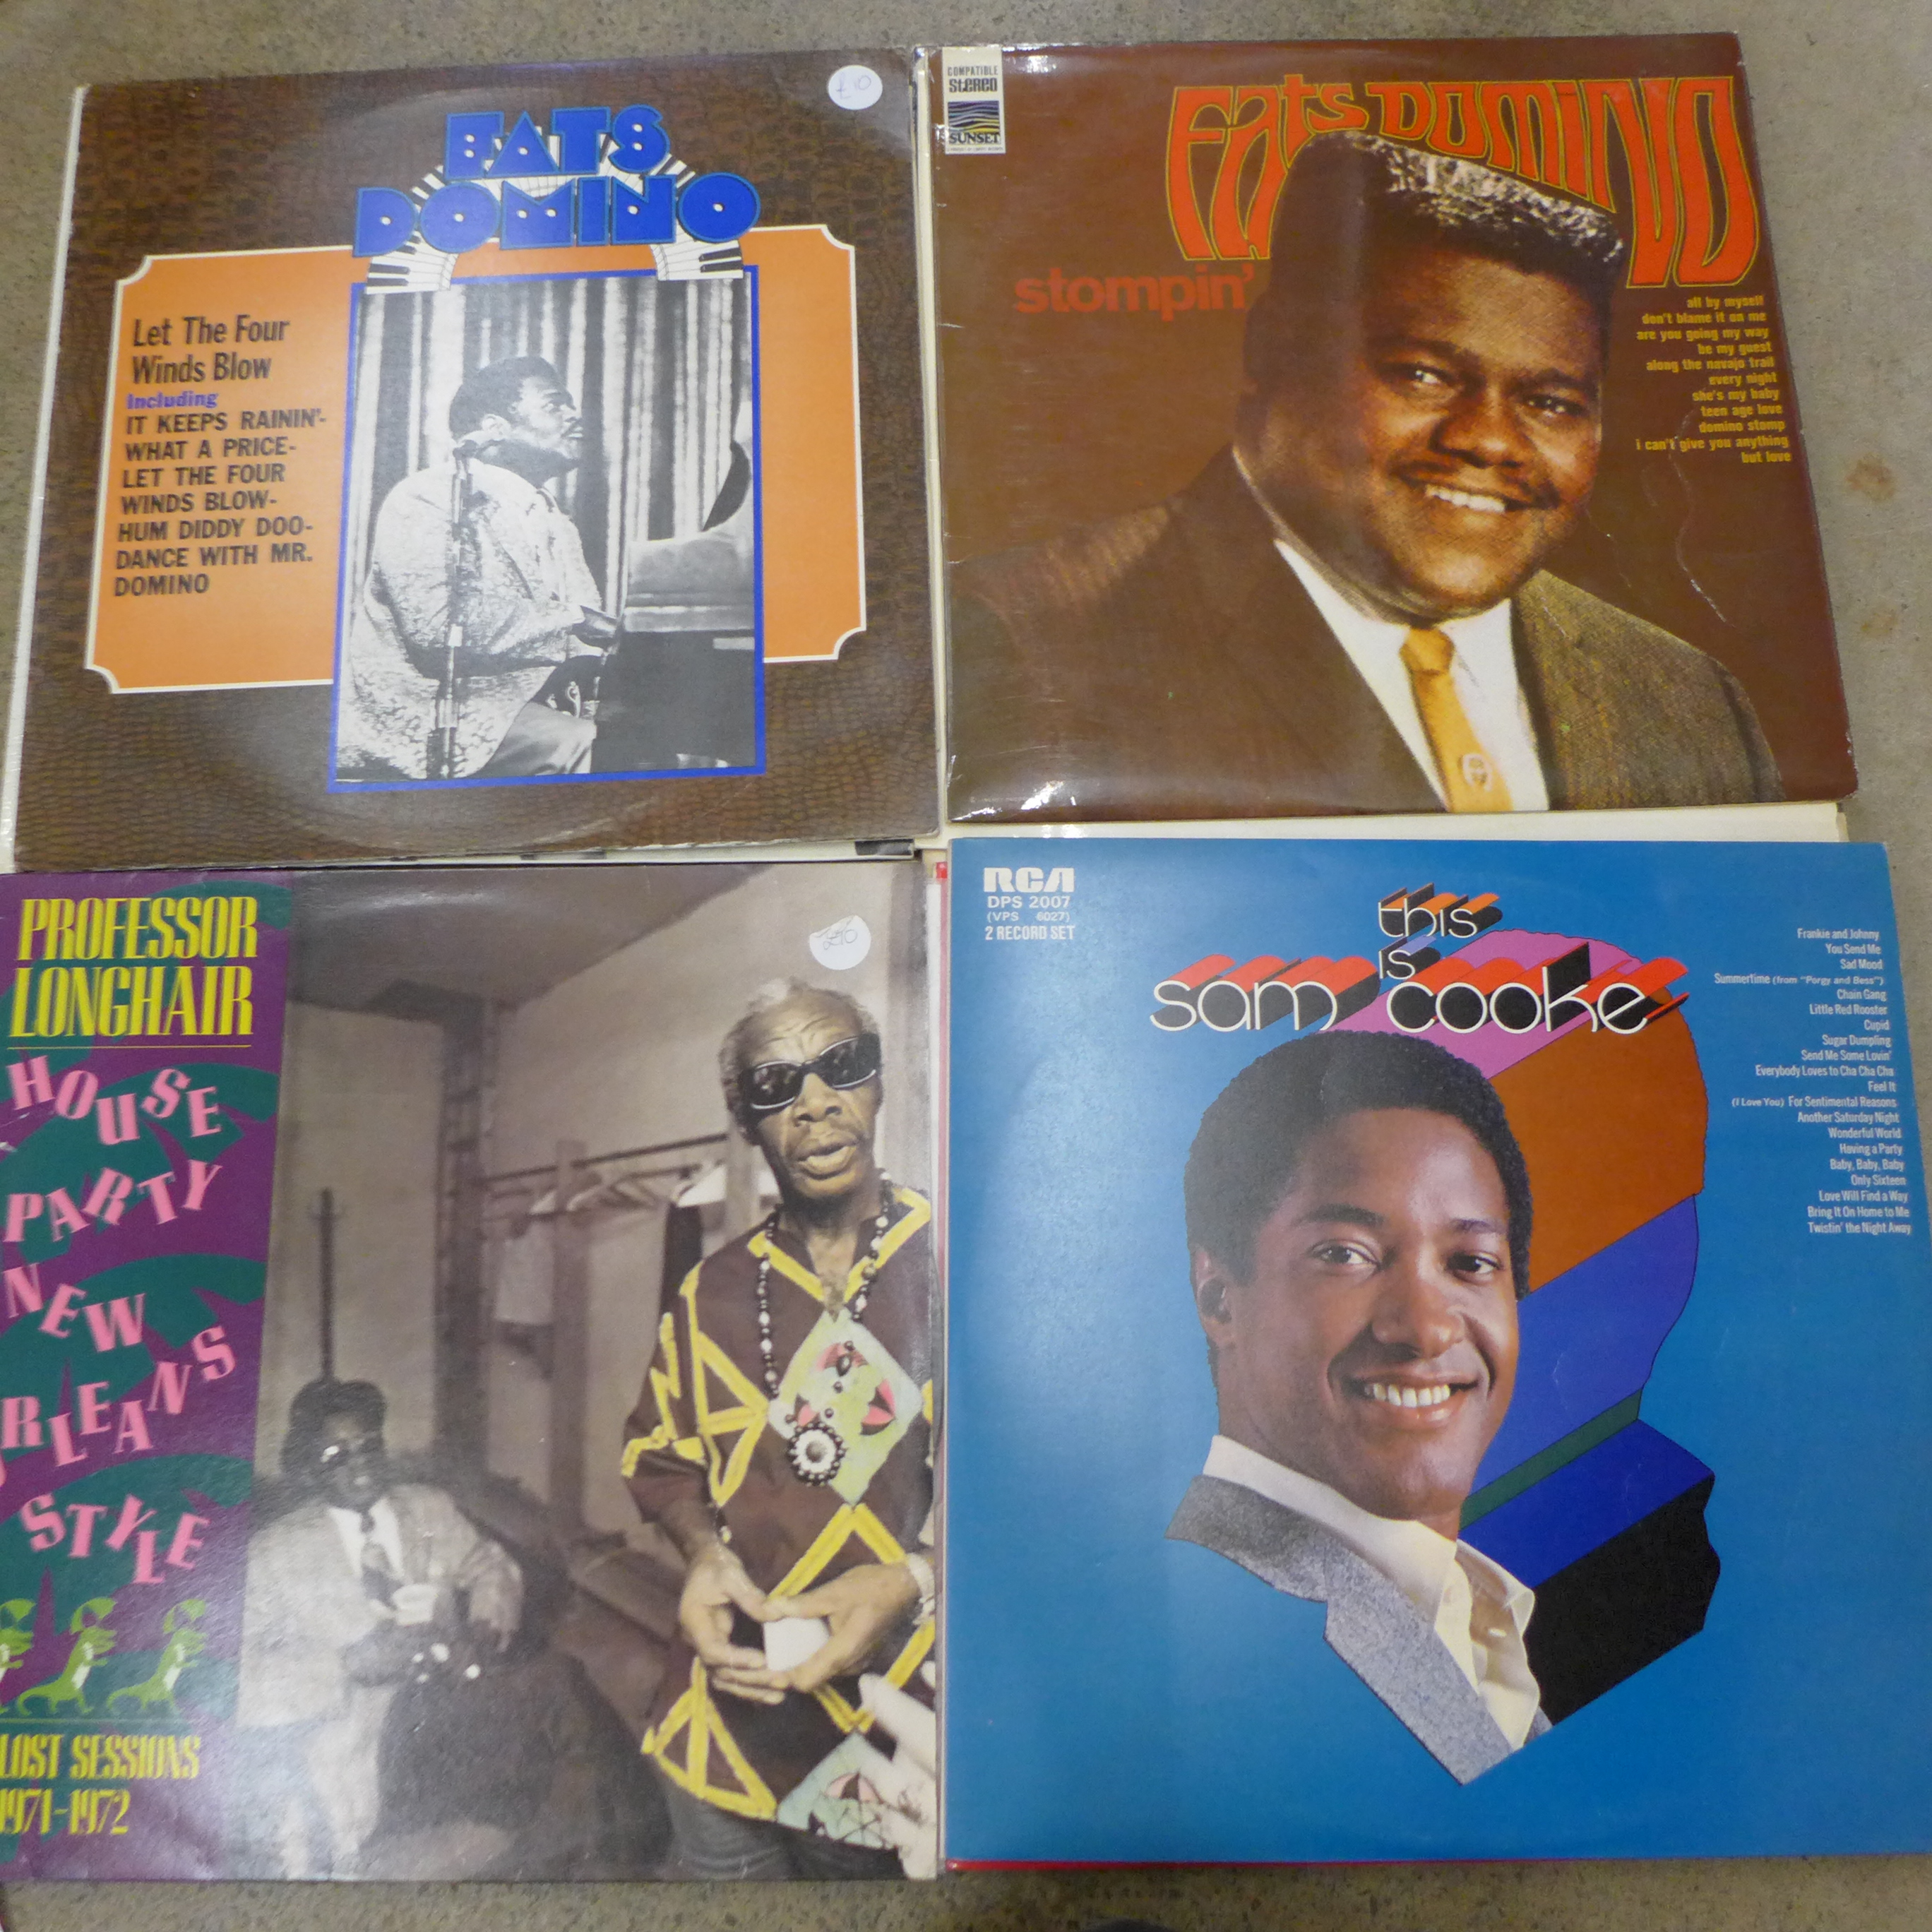 A collection of 22 LP records including Stardust, Fats Domino, Roberta Flack, Sam Cooke, etc. - Image 3 of 4